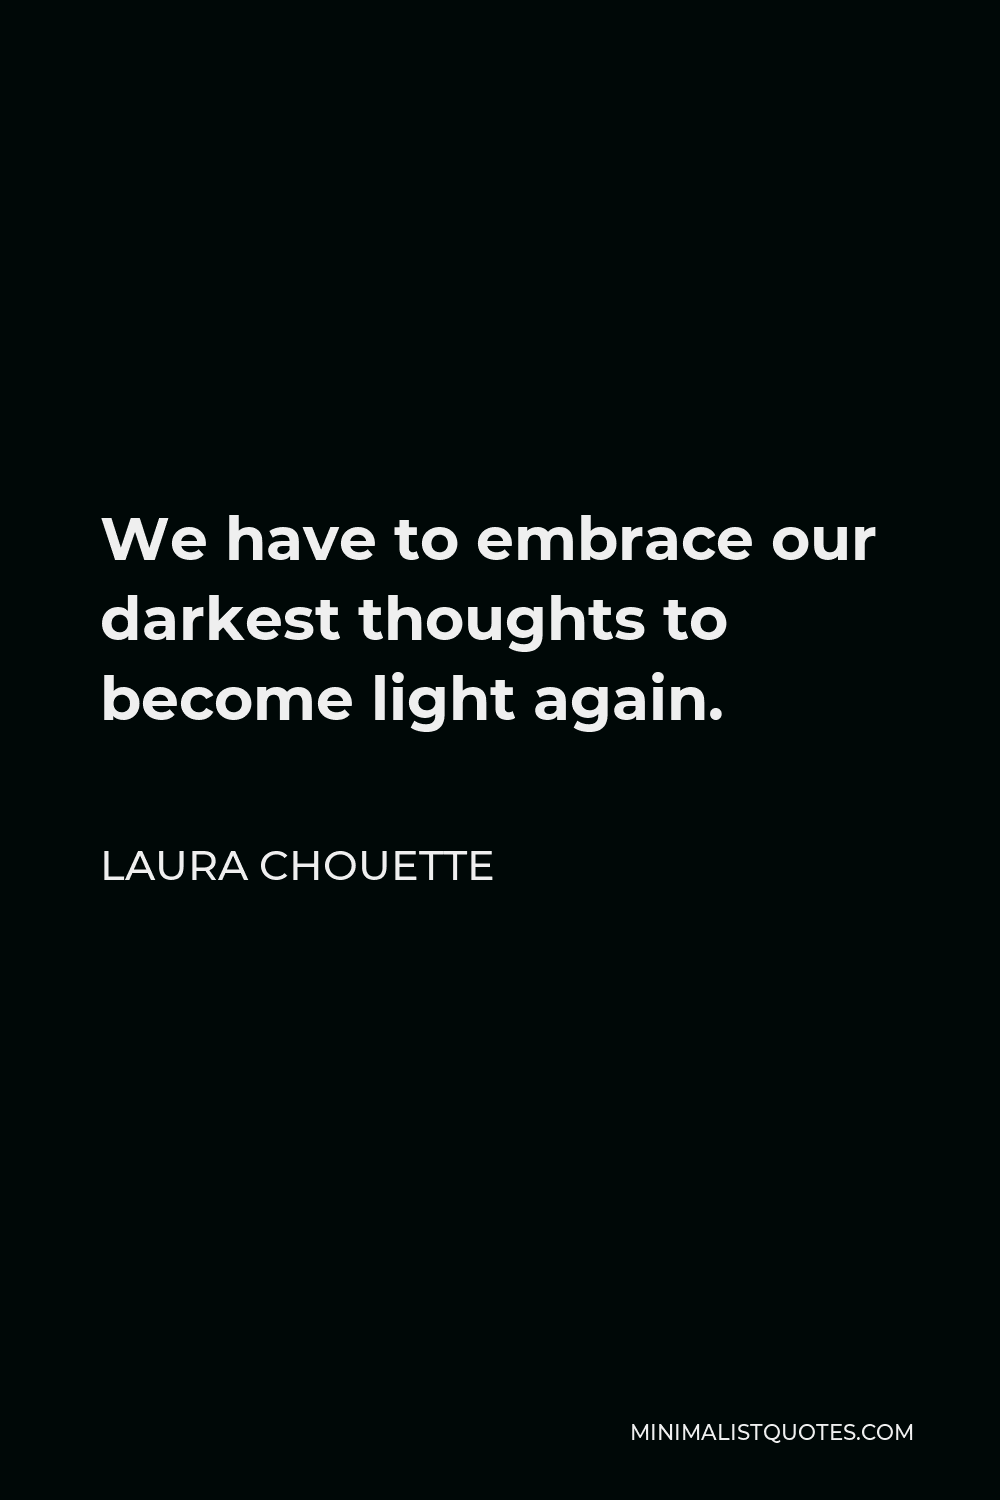 Laura Chouette Quote - We have to embrace our darkest thoughts to become light again.